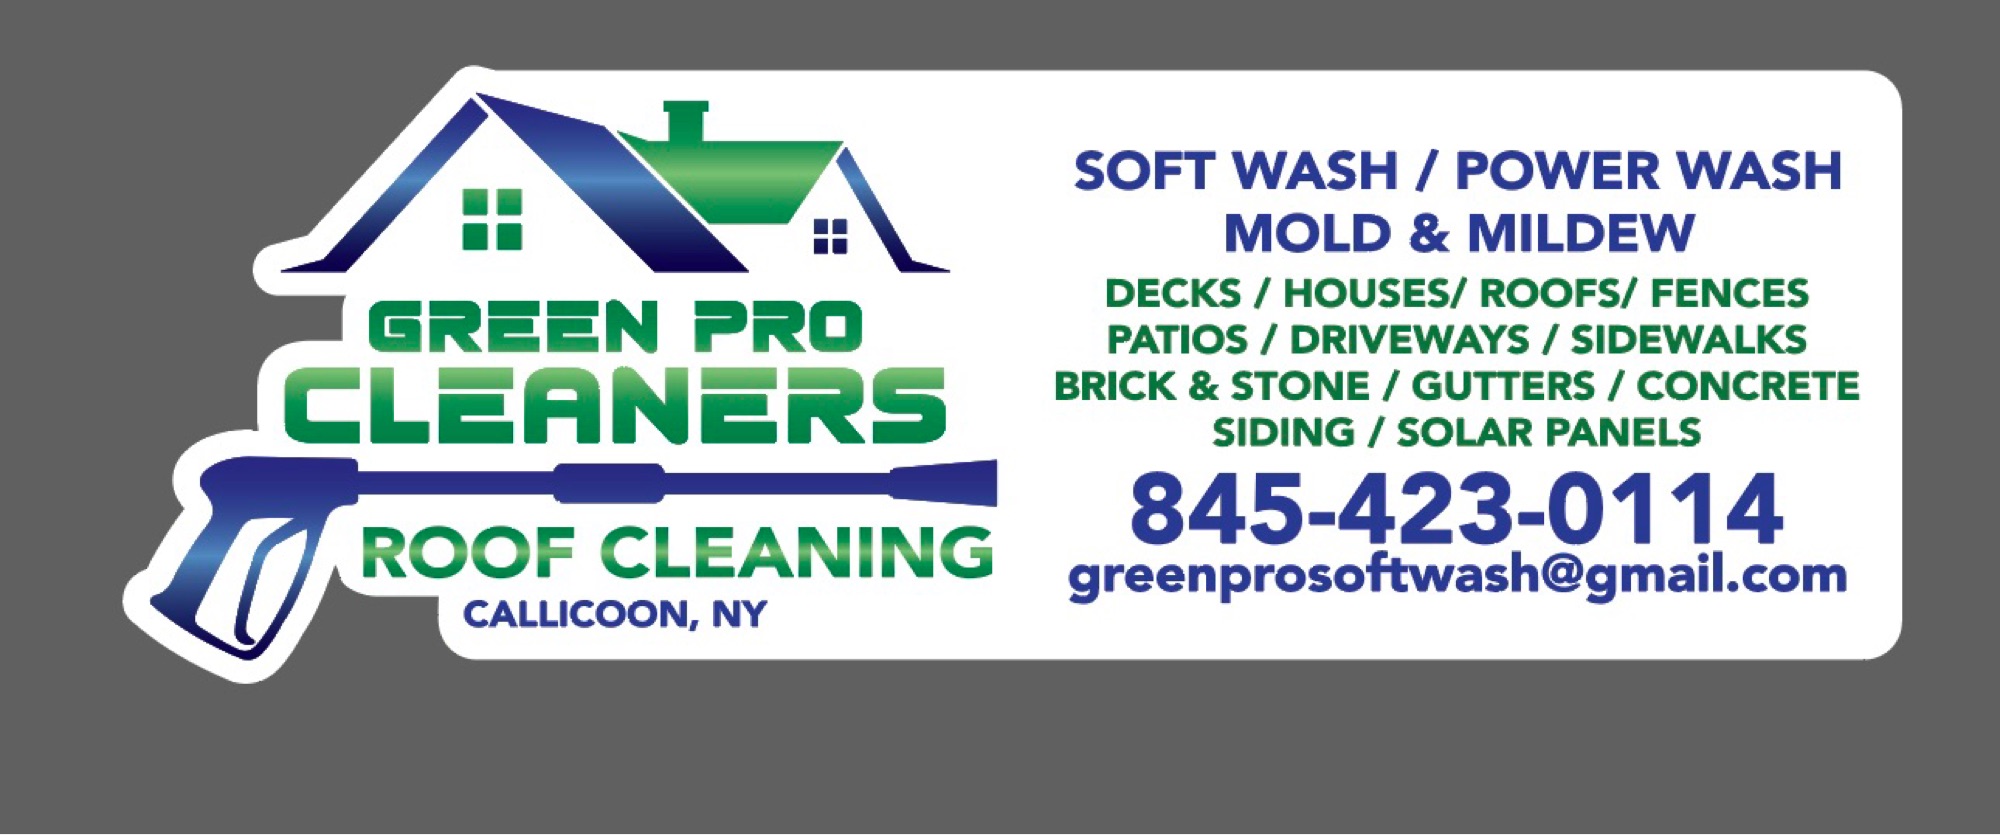 Green Pro Cleaners Logo